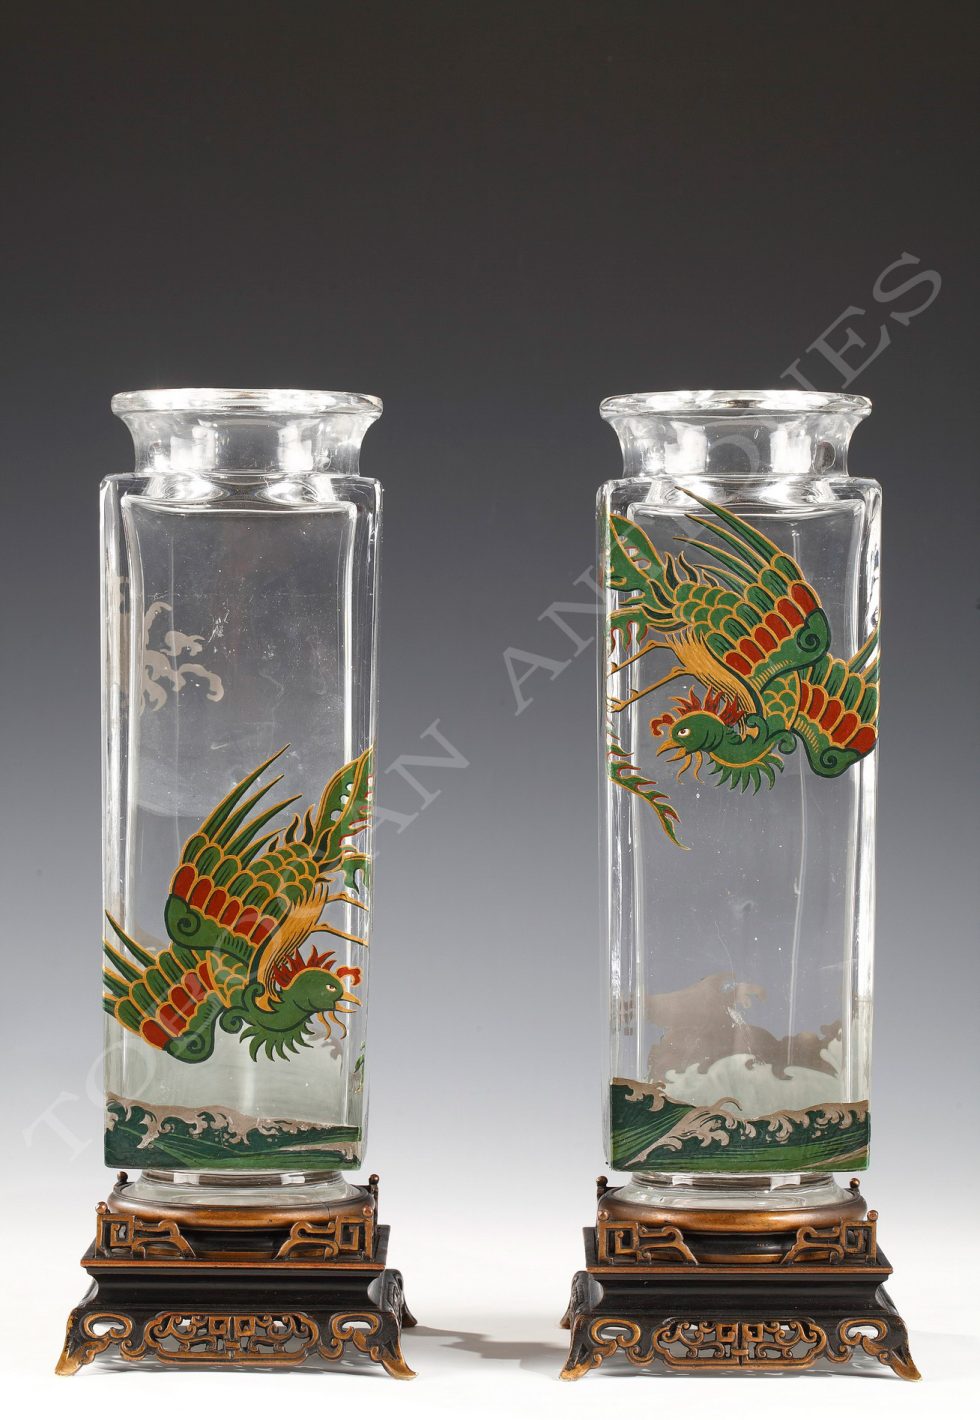 Baccarat <br/> Charming pair of vases